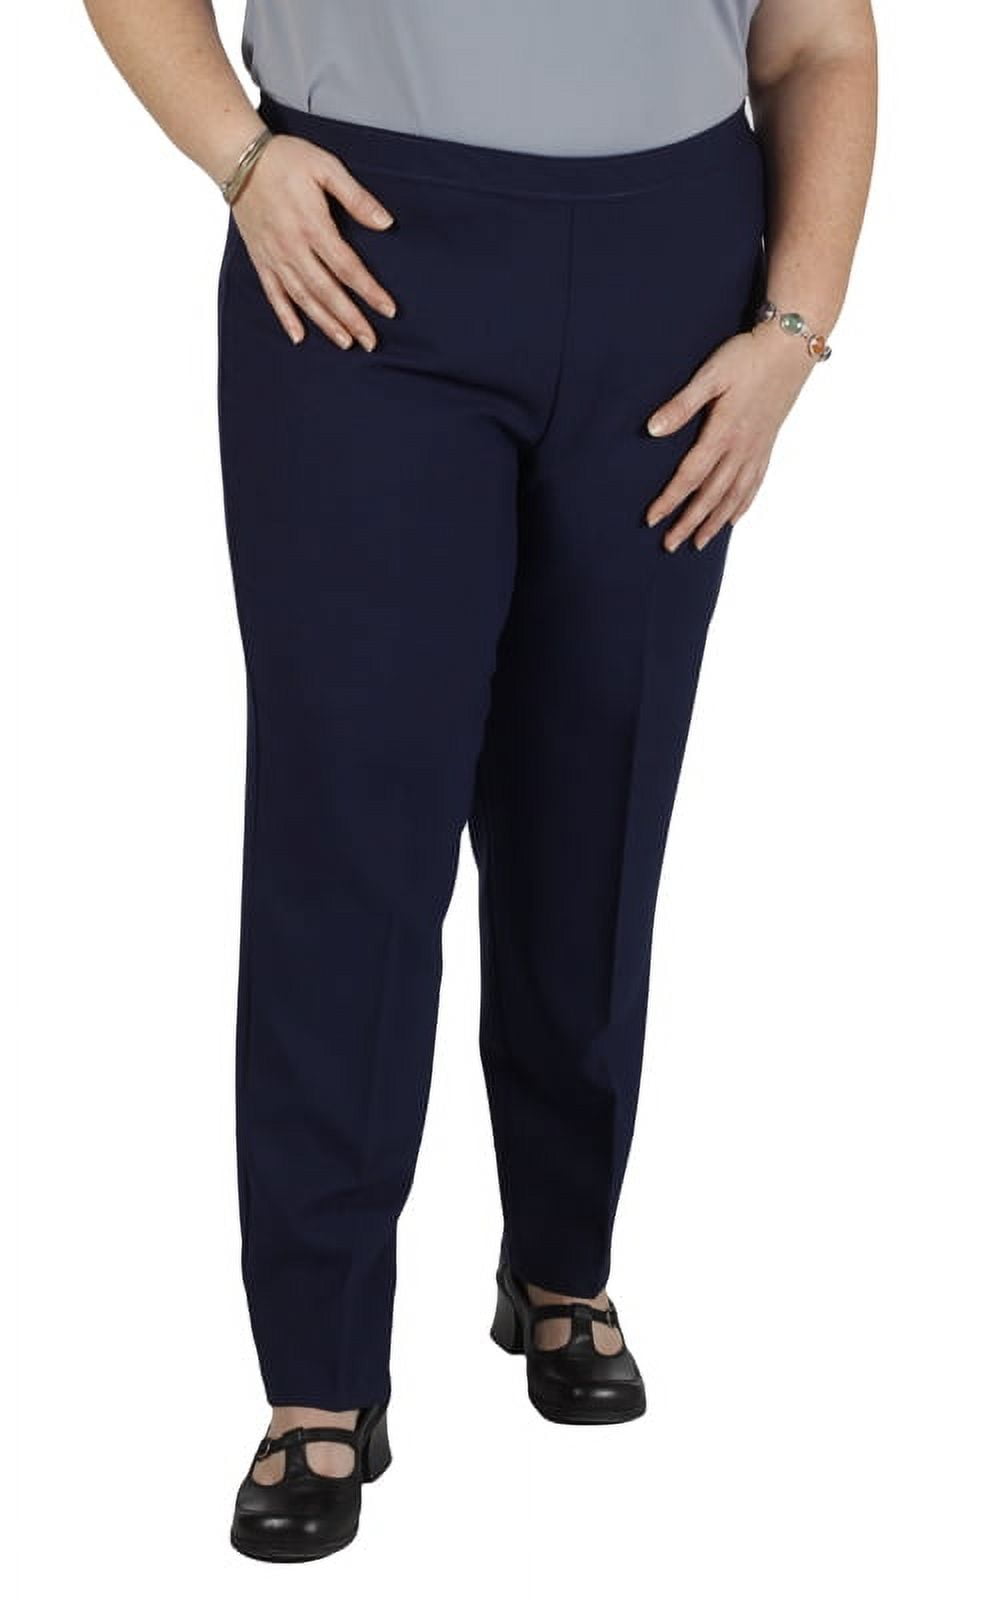 Women's Plus Size Navy Bend Over® Pull-On Pants - 30WP 